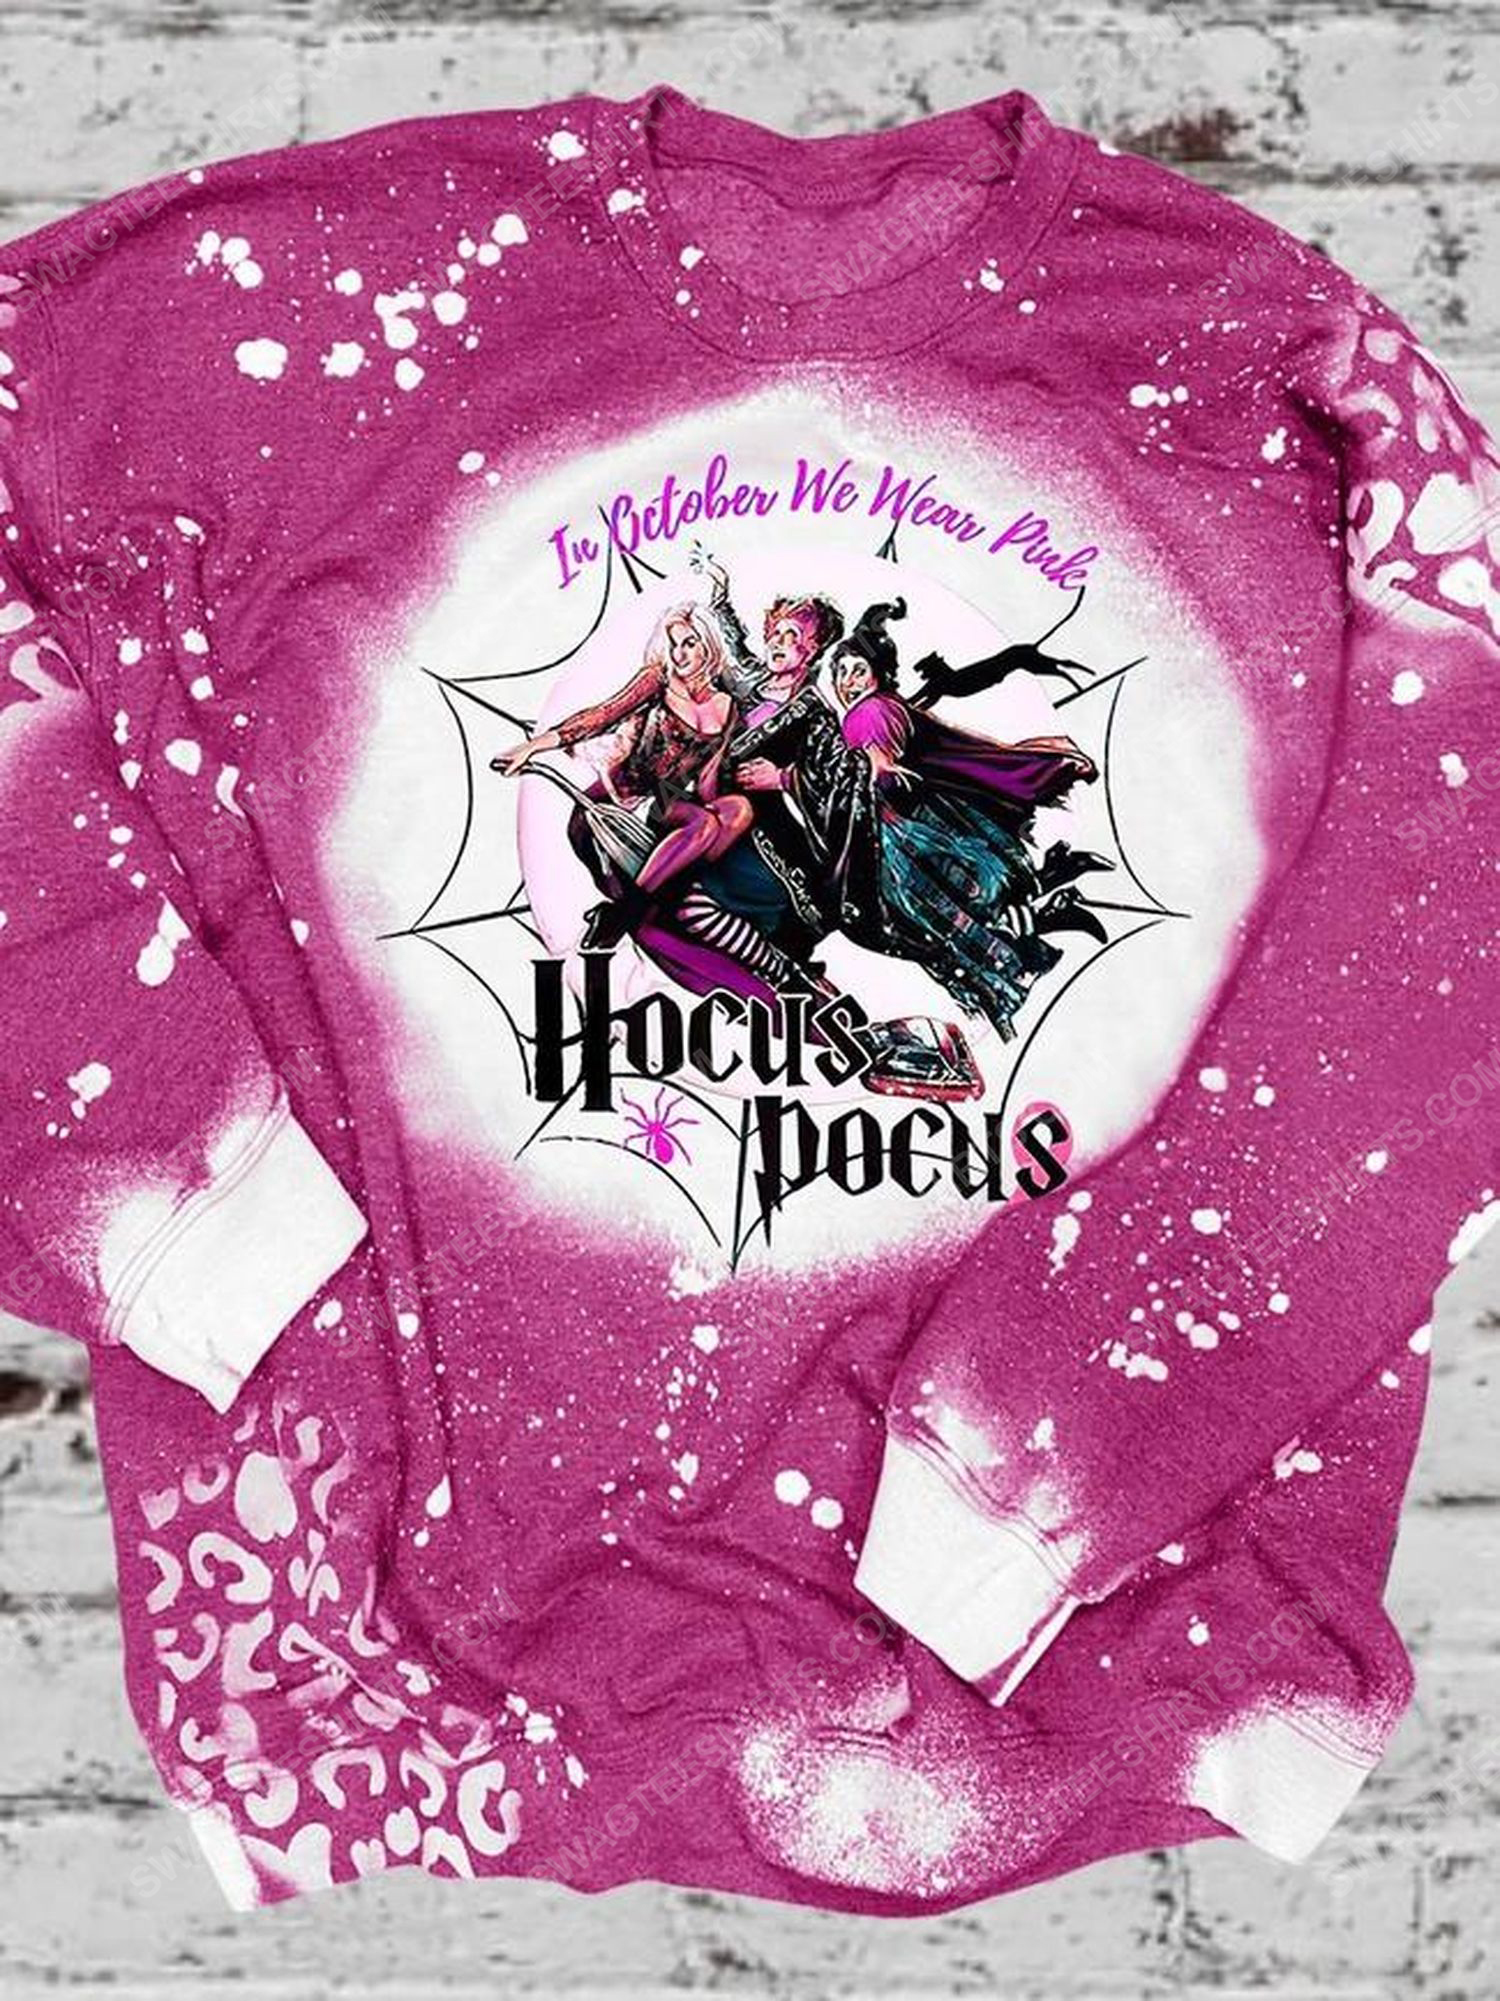 [special edition] Breast cancer in october we wear pink hocus pocus full print shirt – maria (cancer)